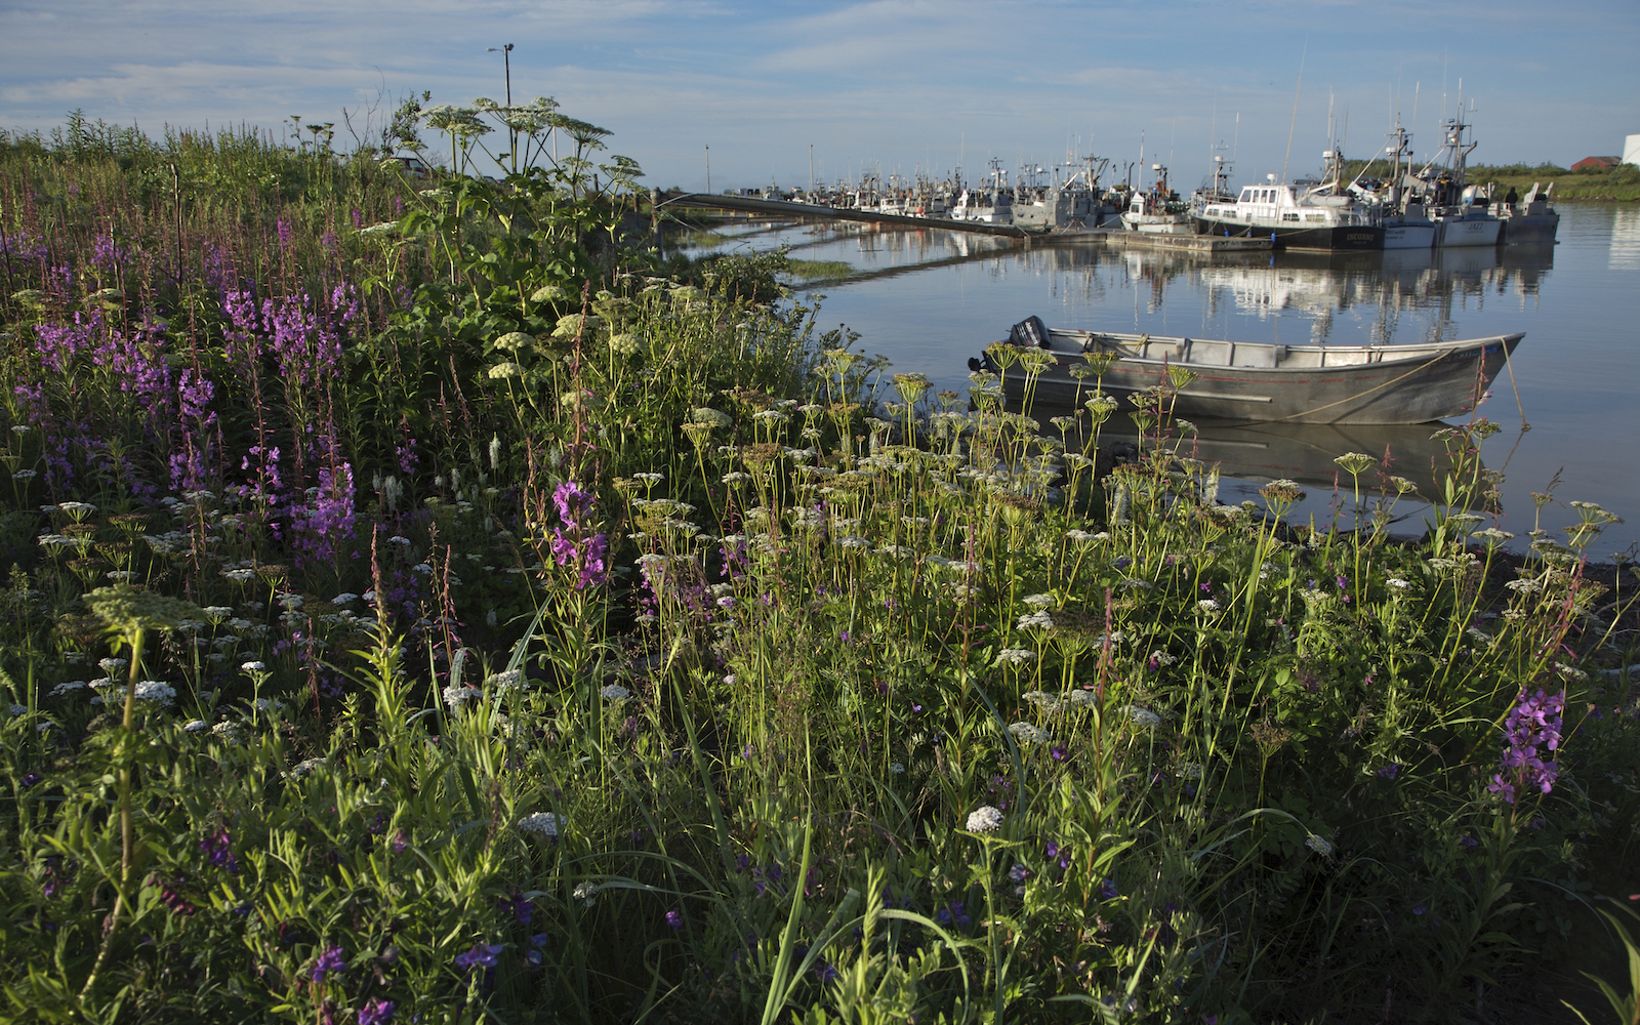 Landscape of boats lined up on docks in the background with purple and white wildflowers and green plants in the foreground.